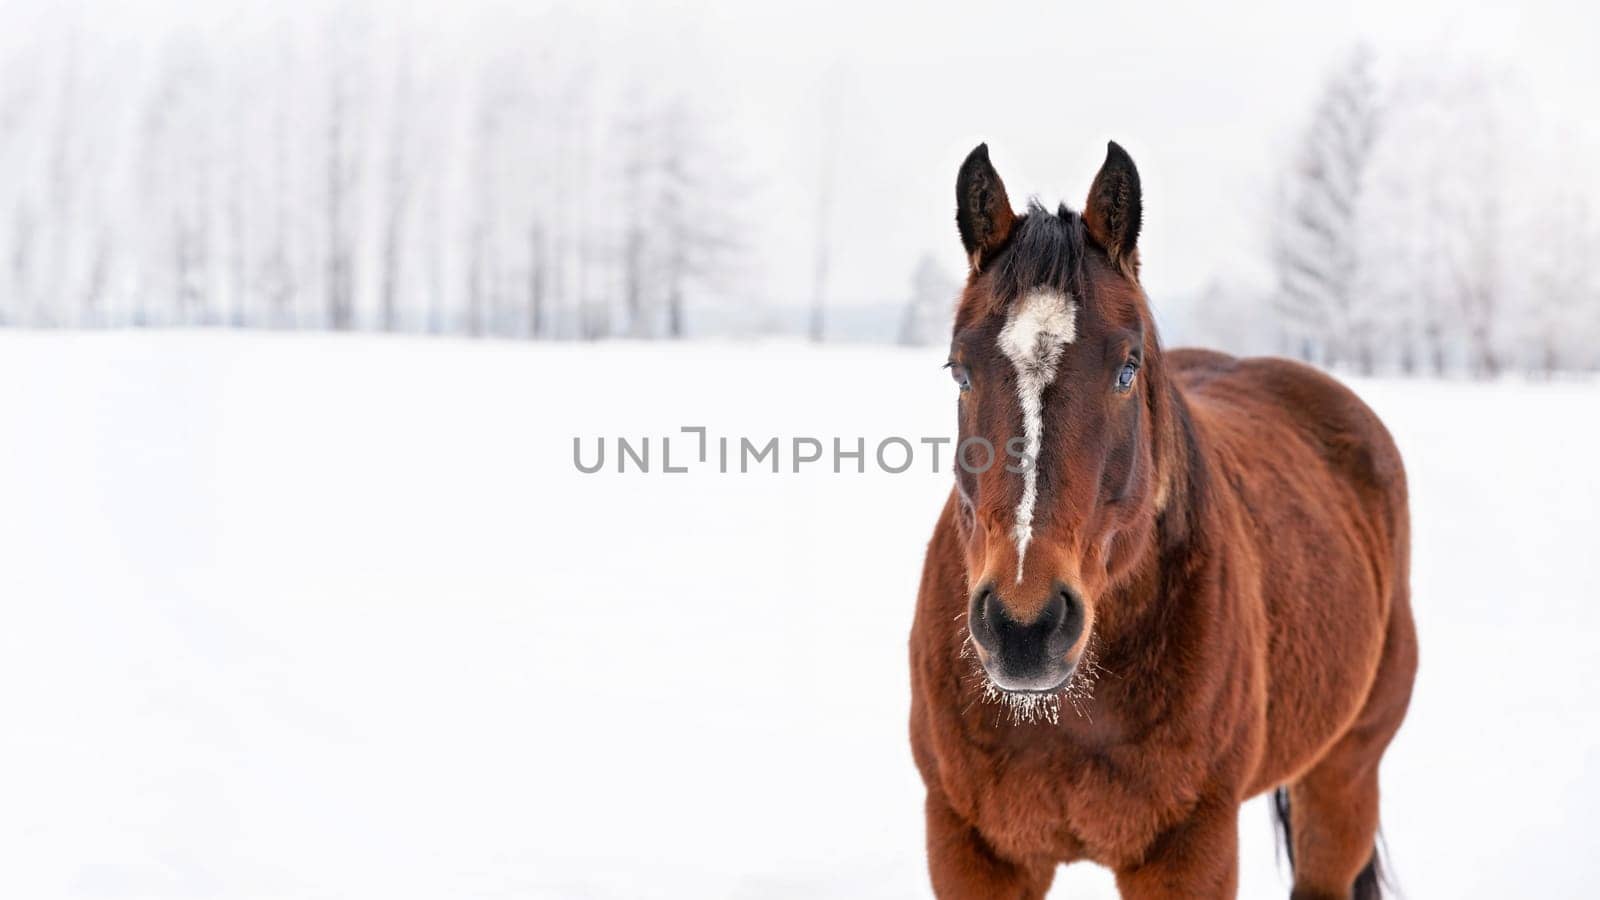 Dark brown horse walks on snow covered field, detail at head from front